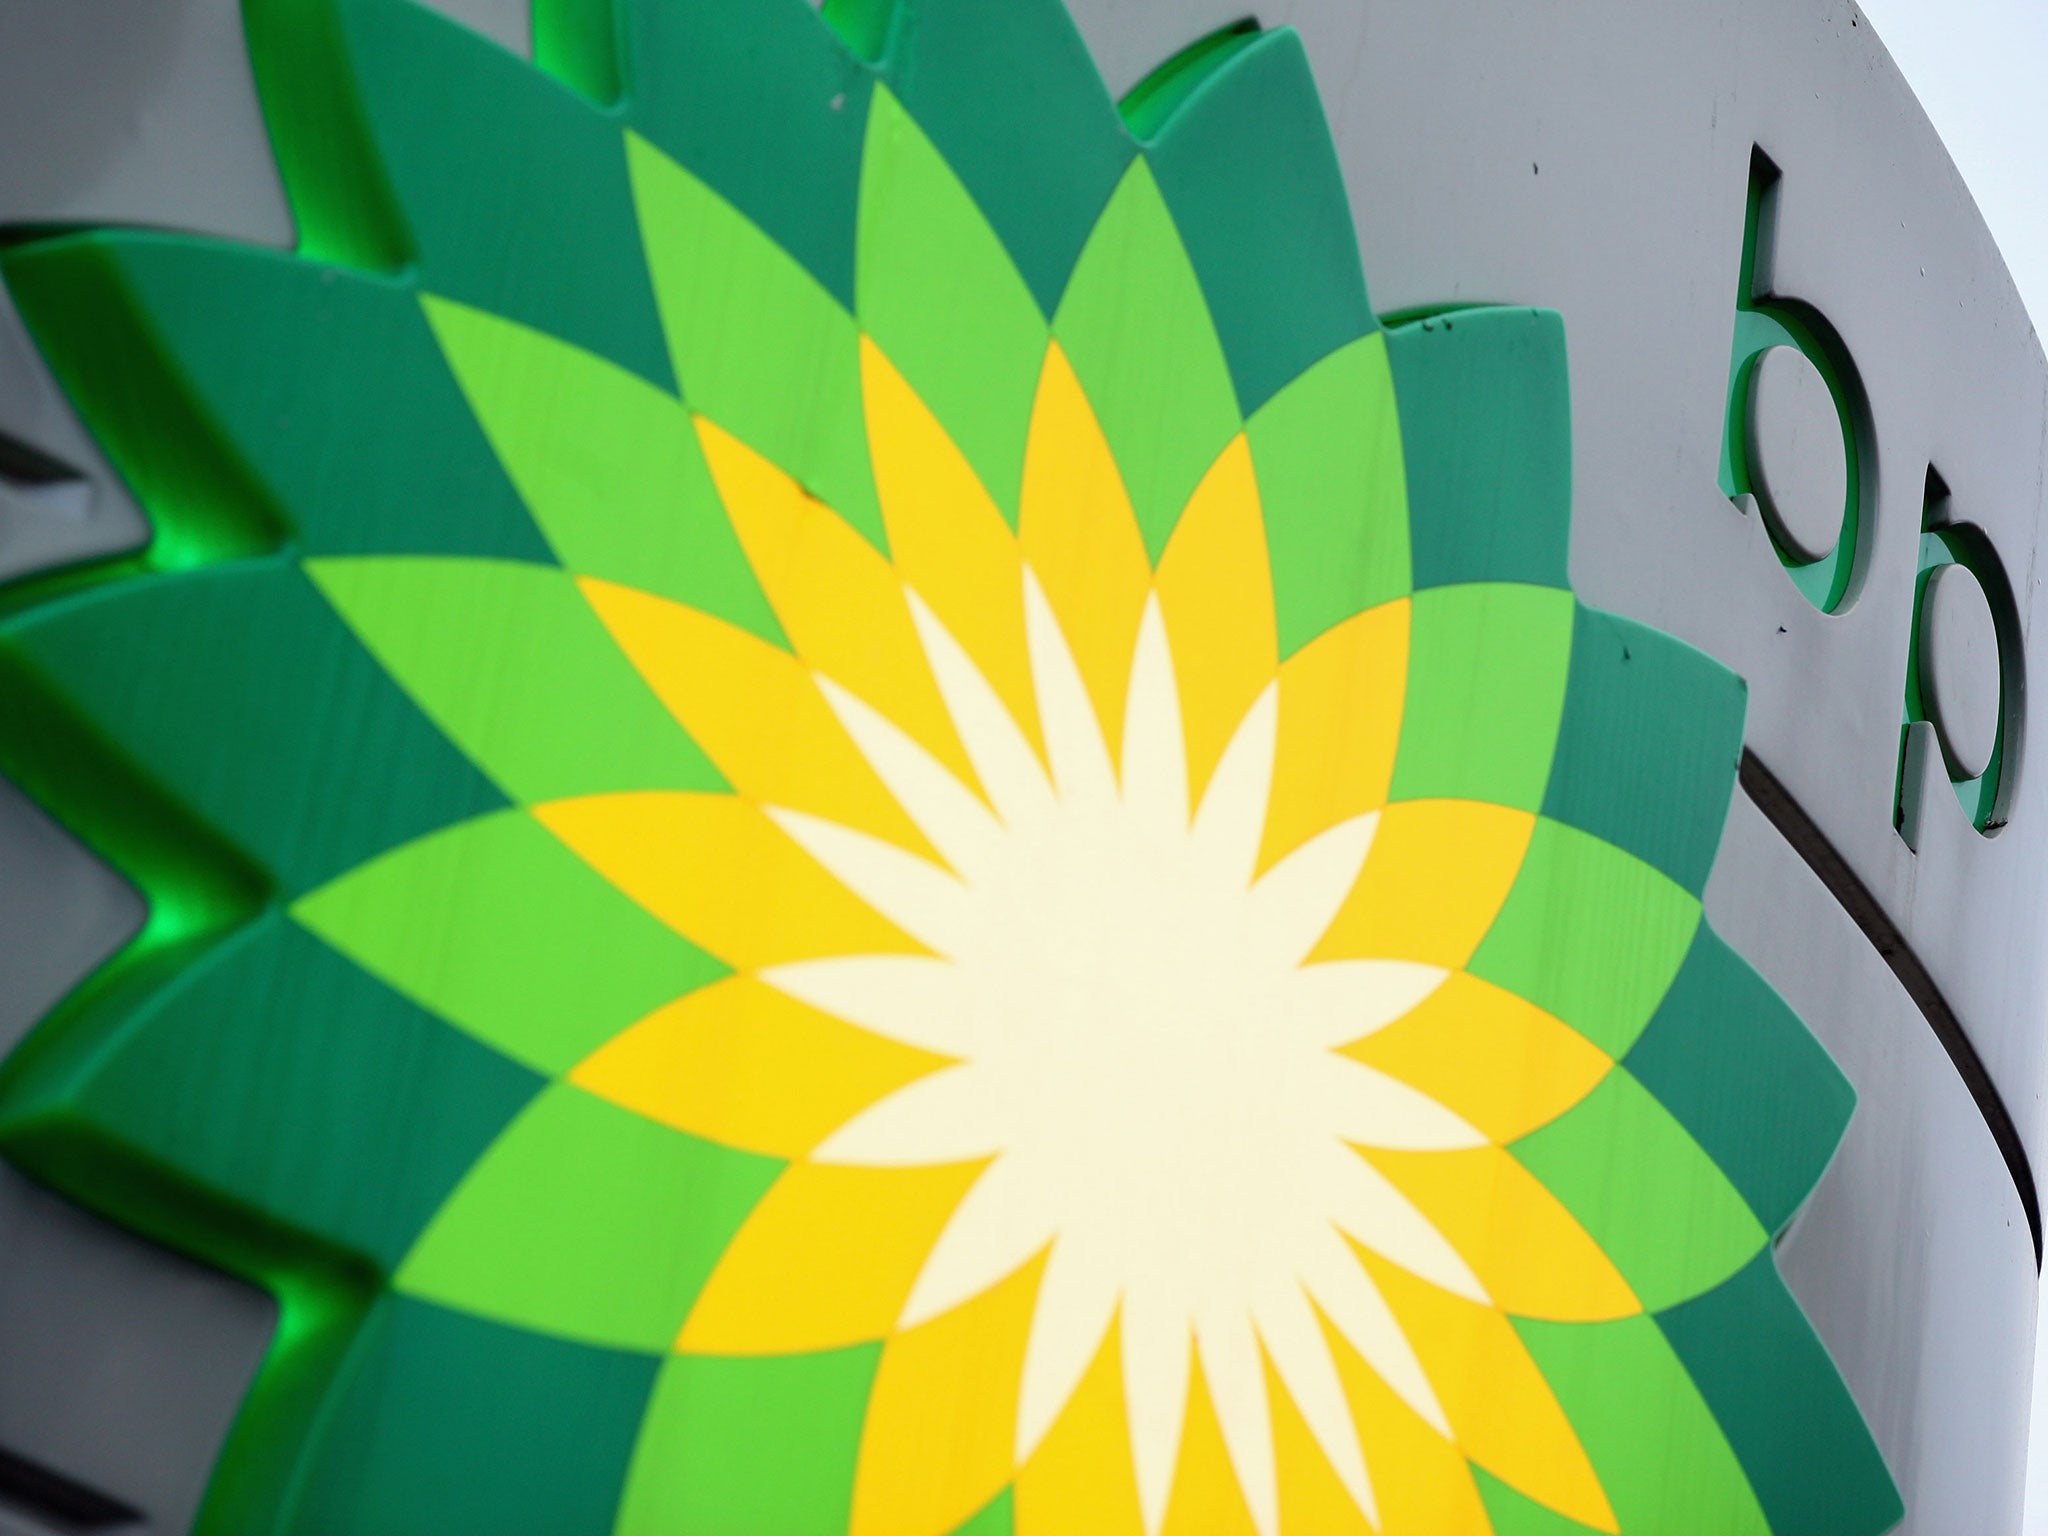 BP said it would maintain its dividend payout of 10 cents per share for the quarter, payable in March